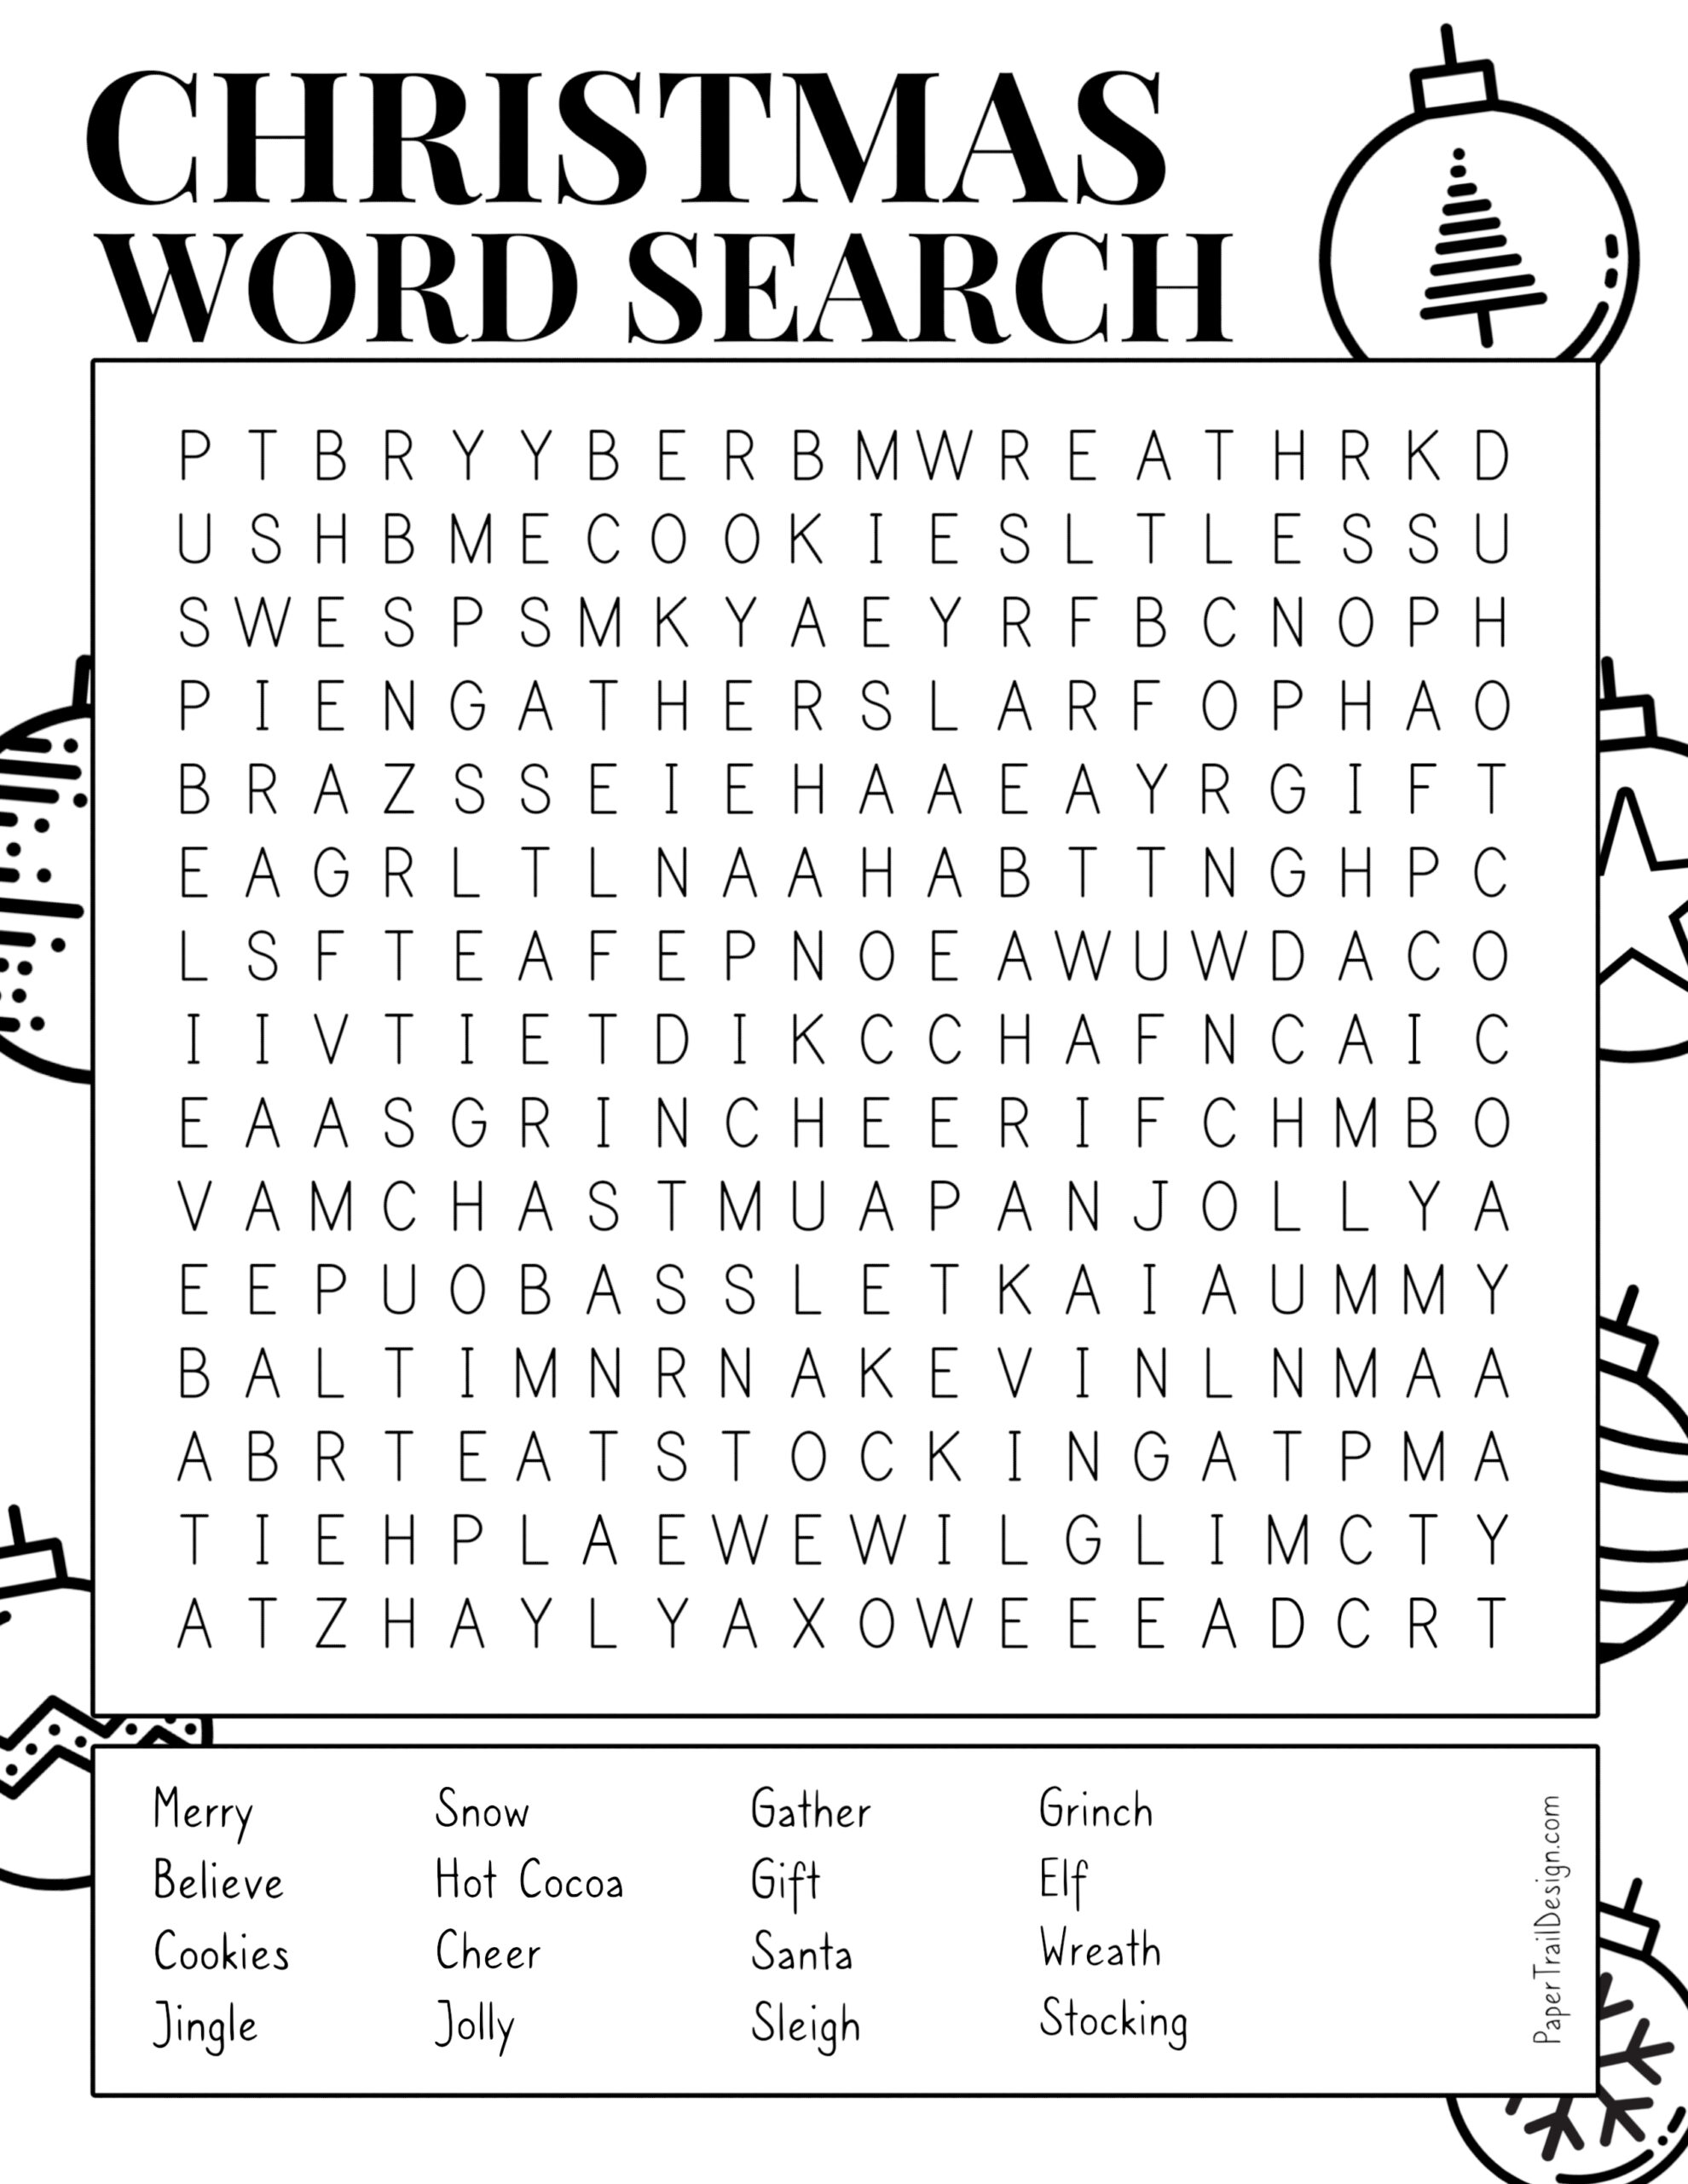 free-christmas-word-search-printable-go-here-to-print-http-superduperkidsblog